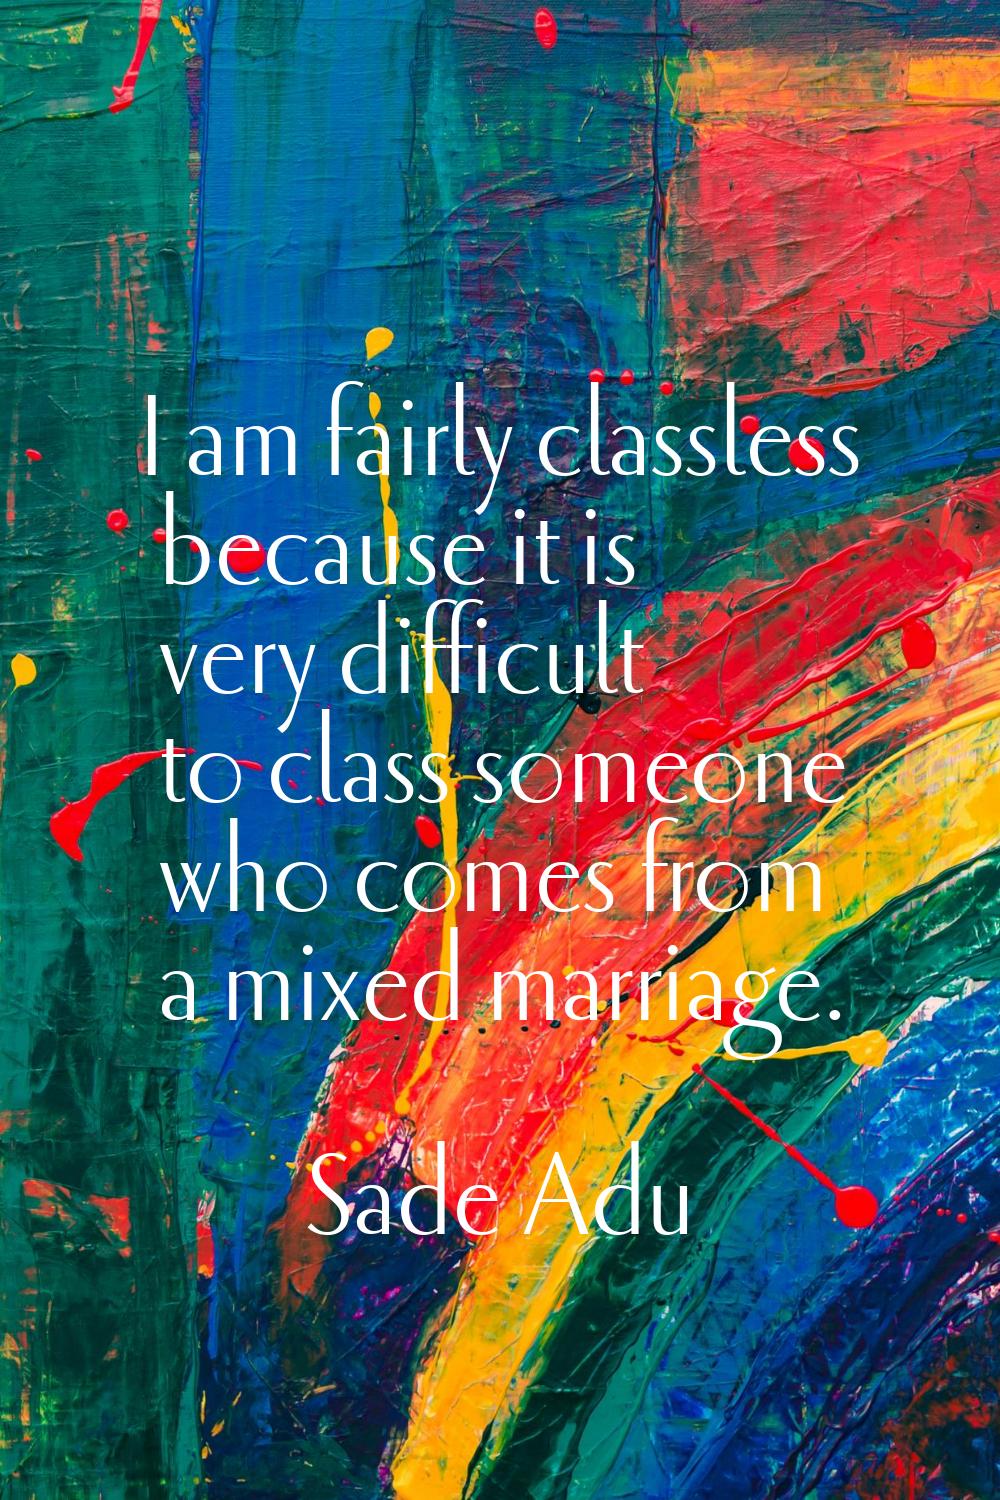 I am fairly classless because it is very difficult to class someone who comes from a mixed marriage